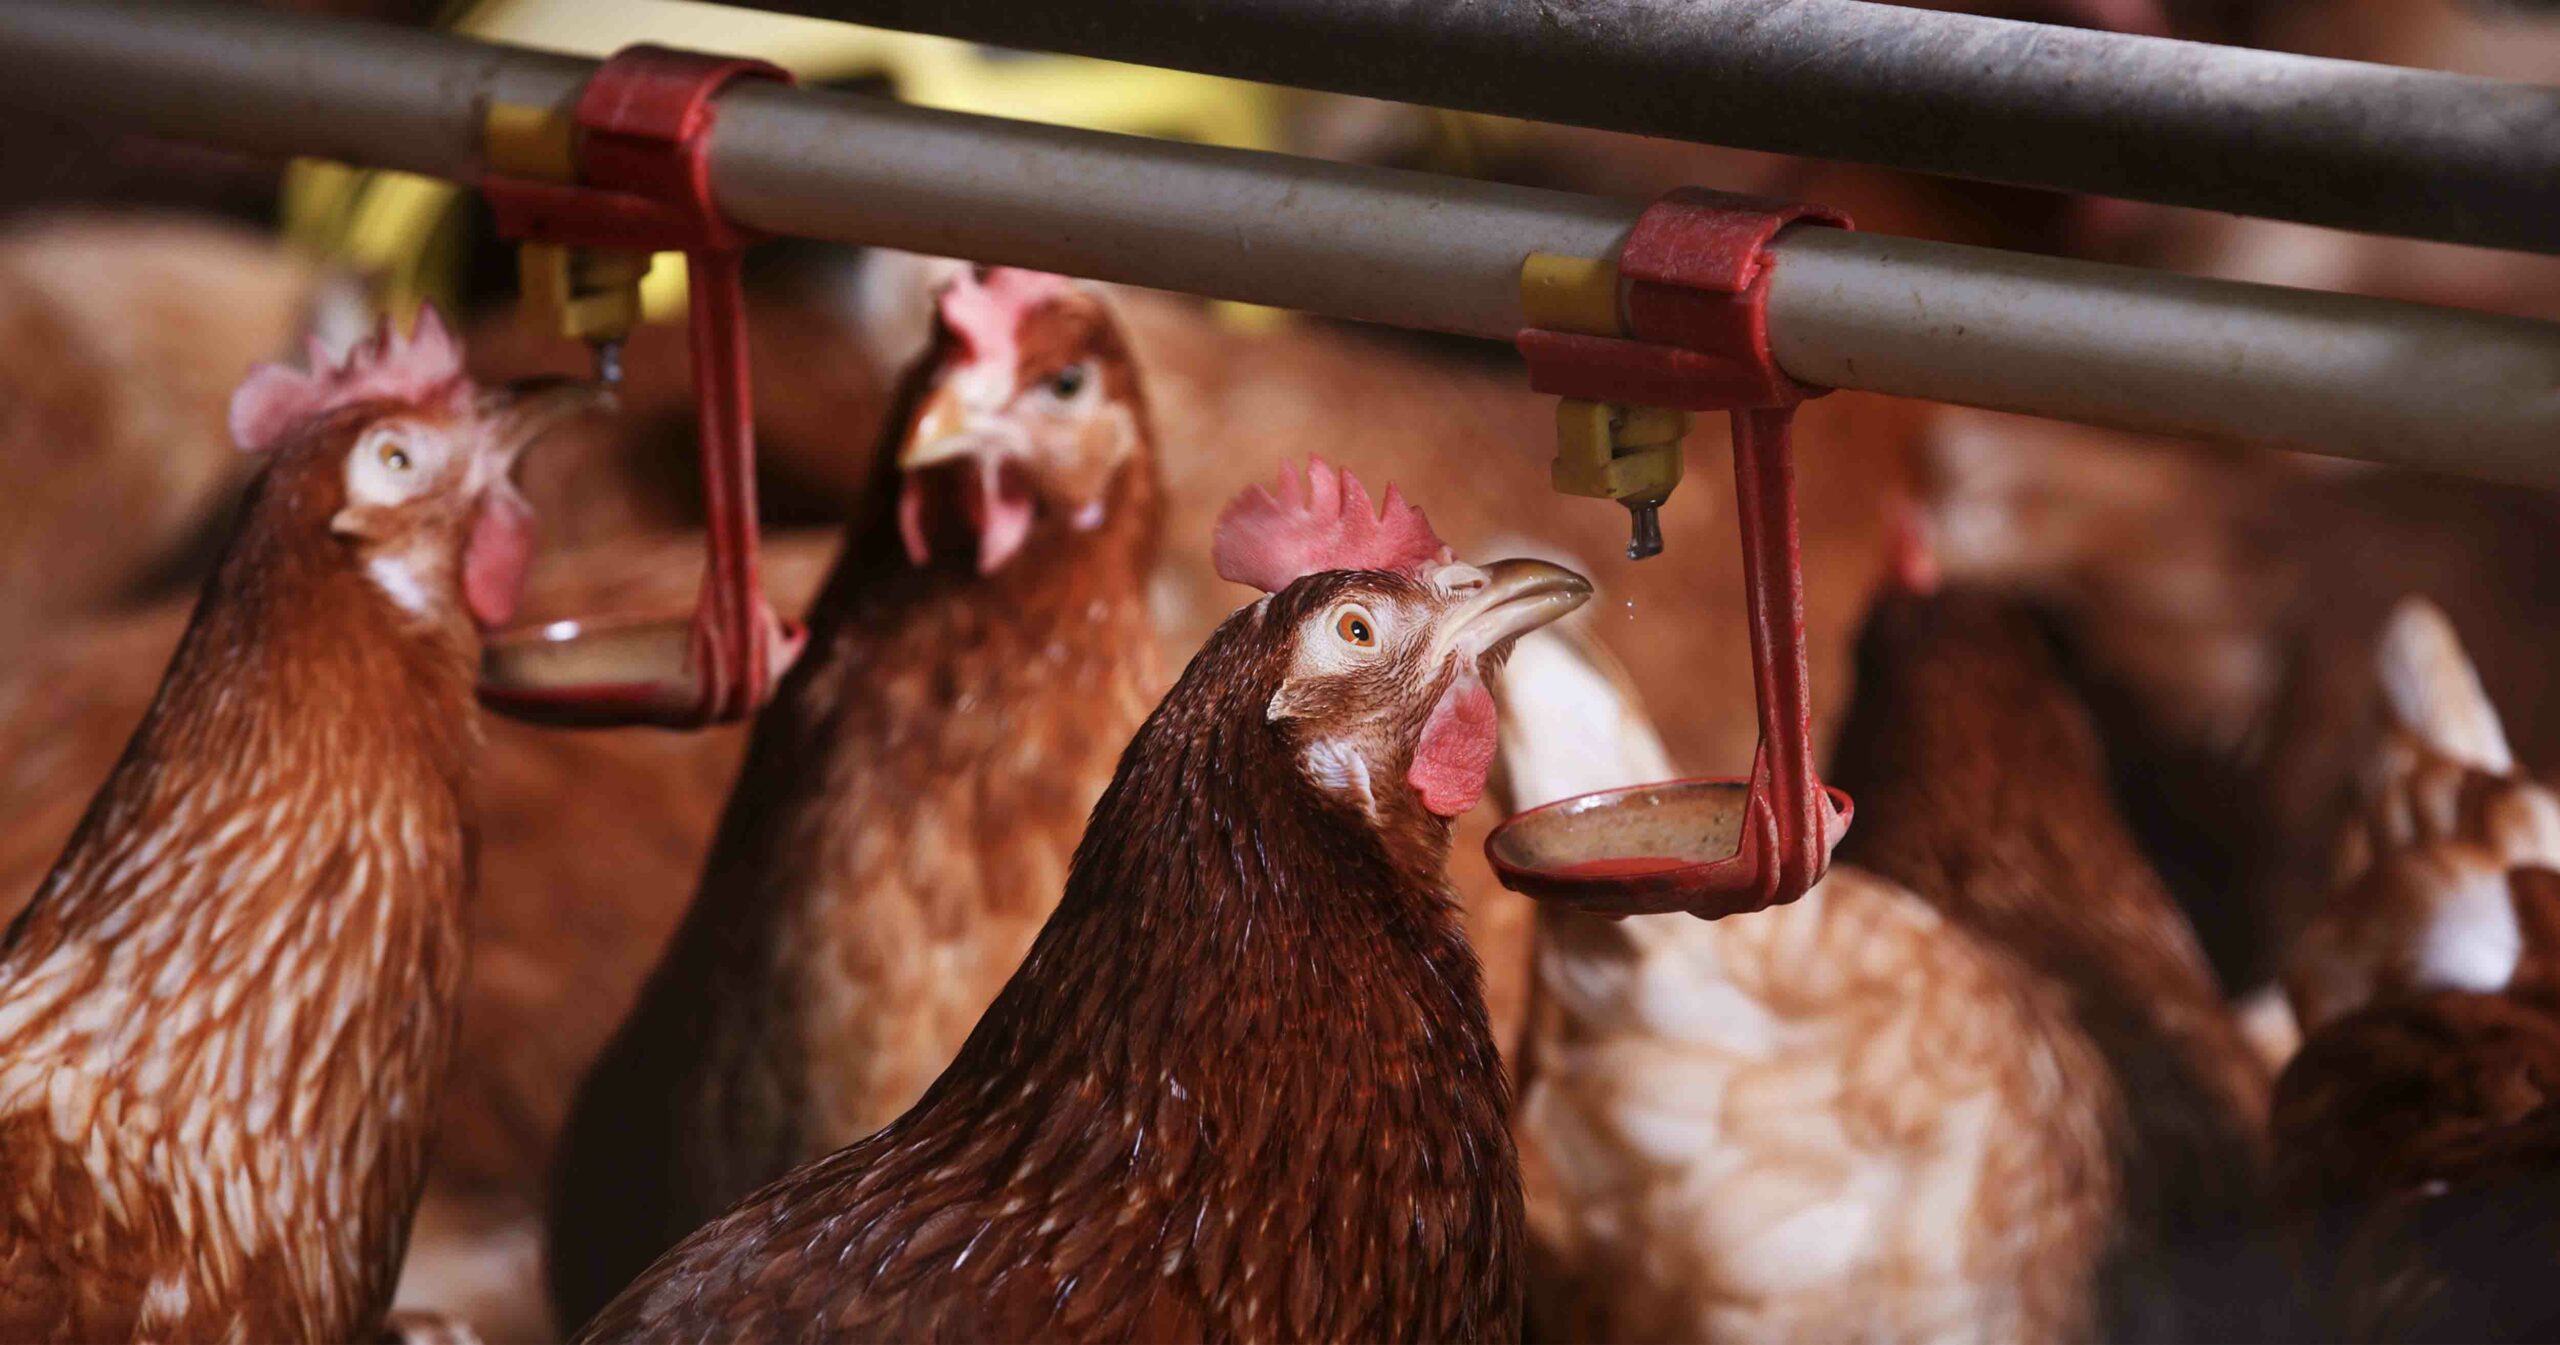 image of chickens drinking | Scandi Standard and Infor